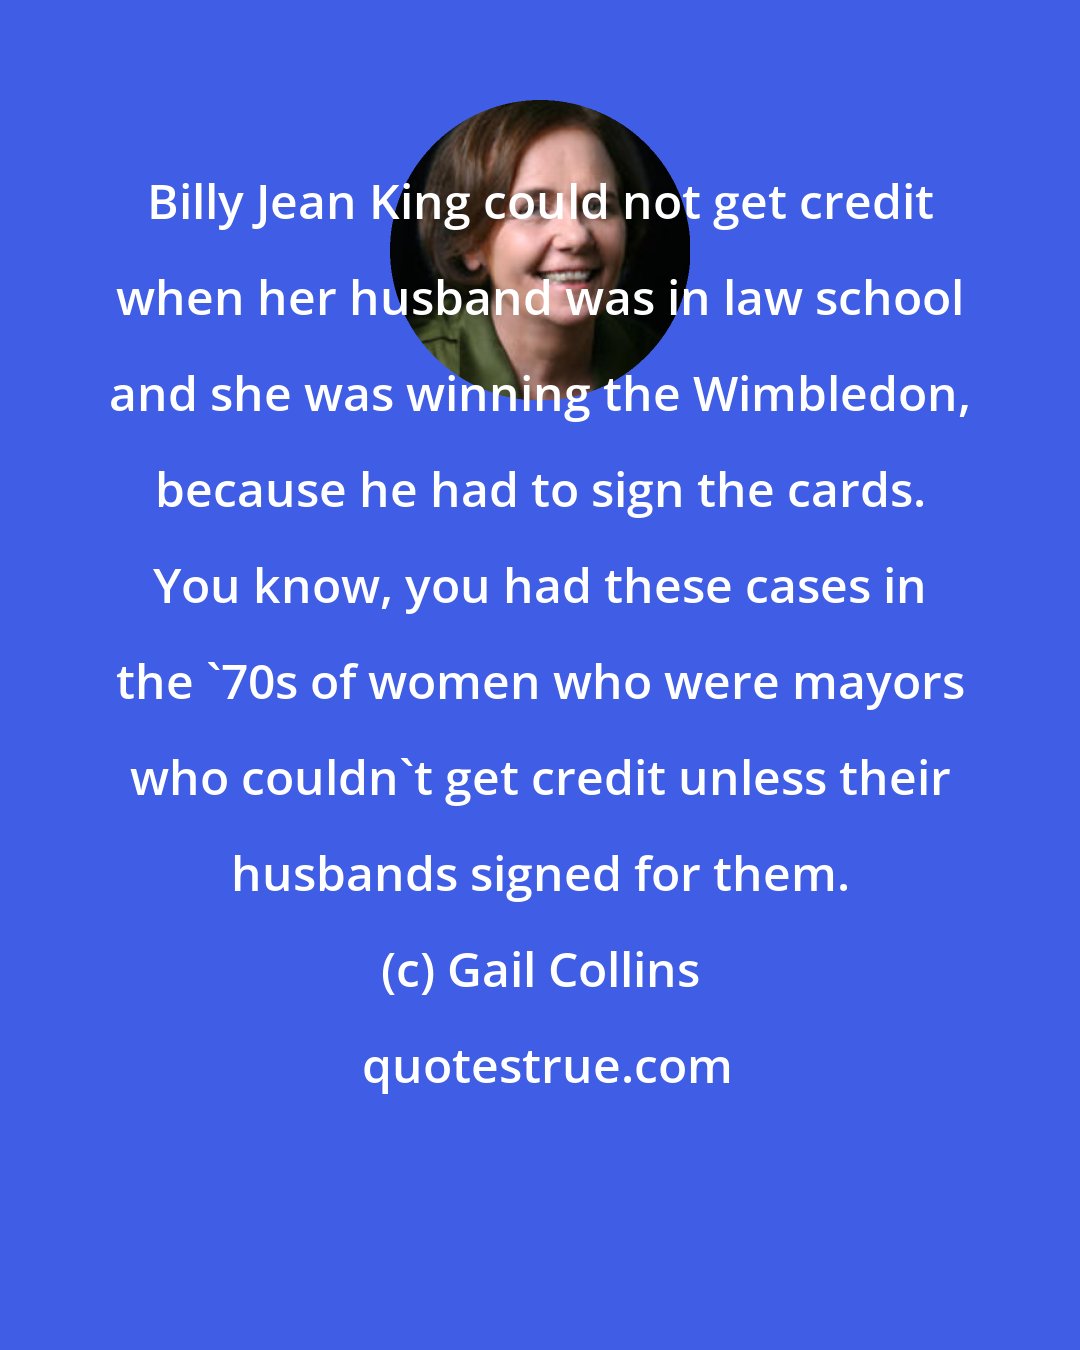 Gail Collins: Billy Jean King could not get credit when her husband was in law school and she was winning the Wimbledon, because he had to sign the cards. You know, you had these cases in the '70s of women who were mayors who couldn't get credit unless their husbands signed for them.